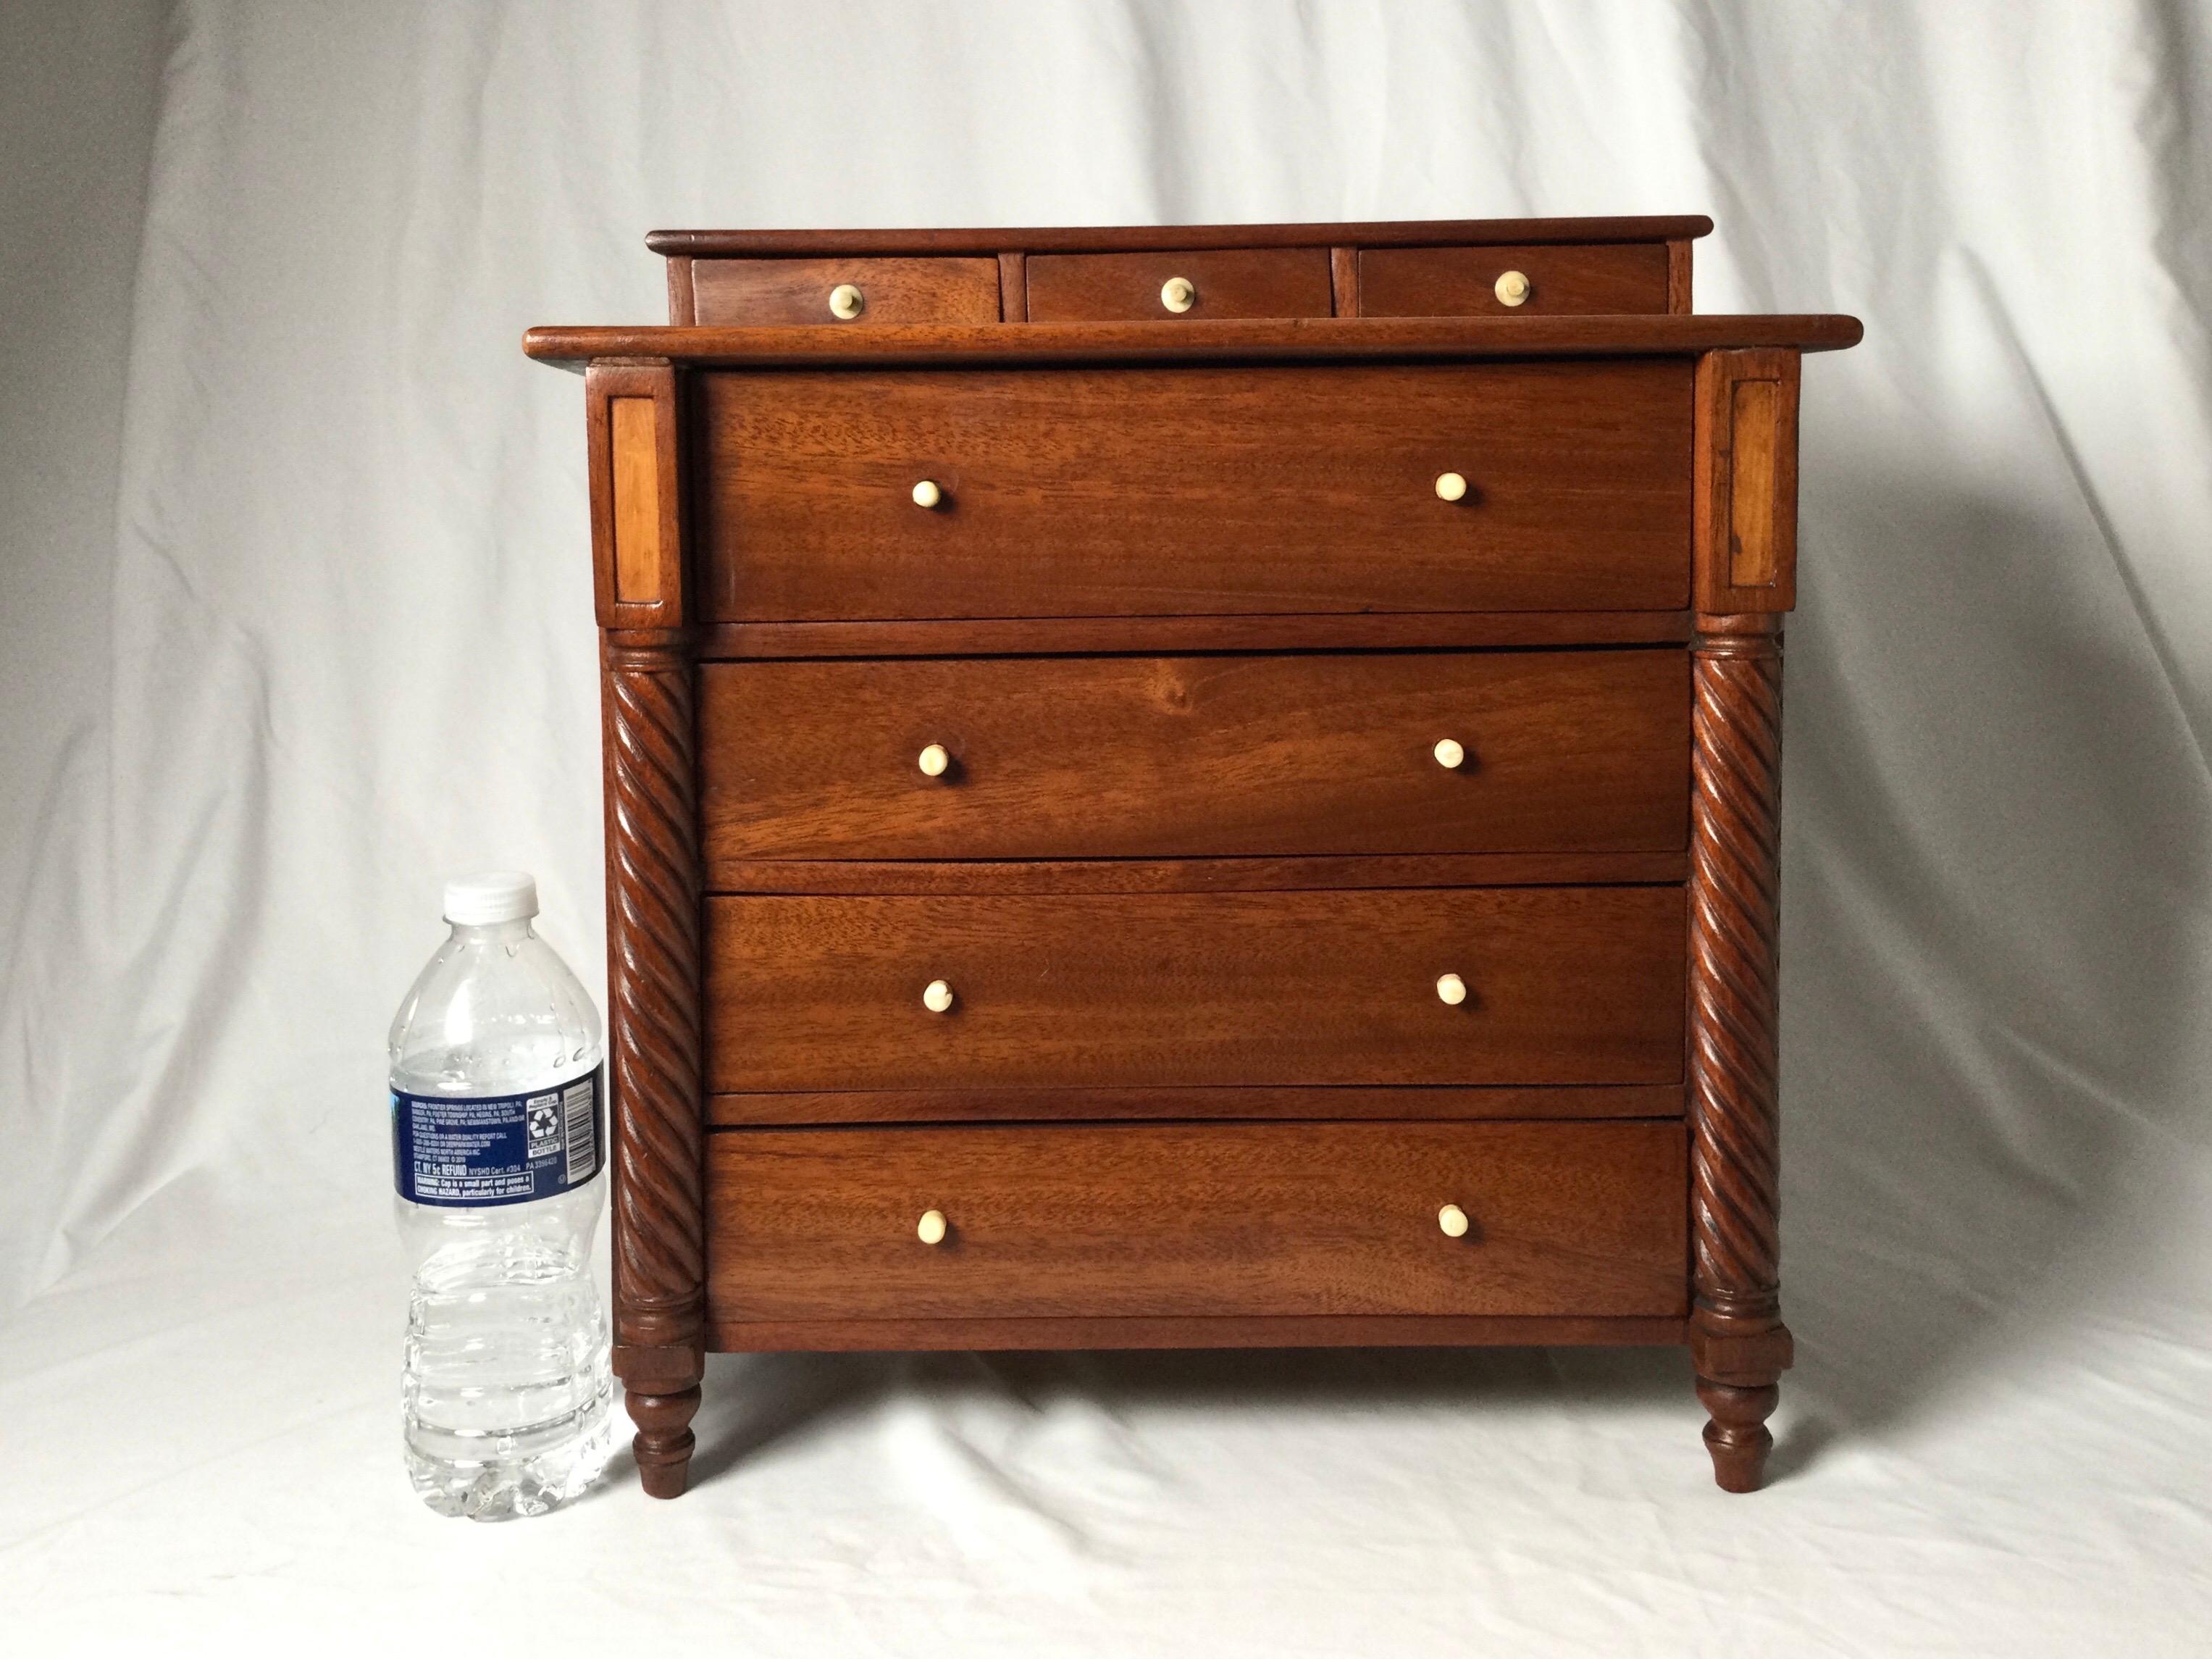 Miniature mahogany four-drawer Sheraton chest with rope turned front legs. Measures: 16